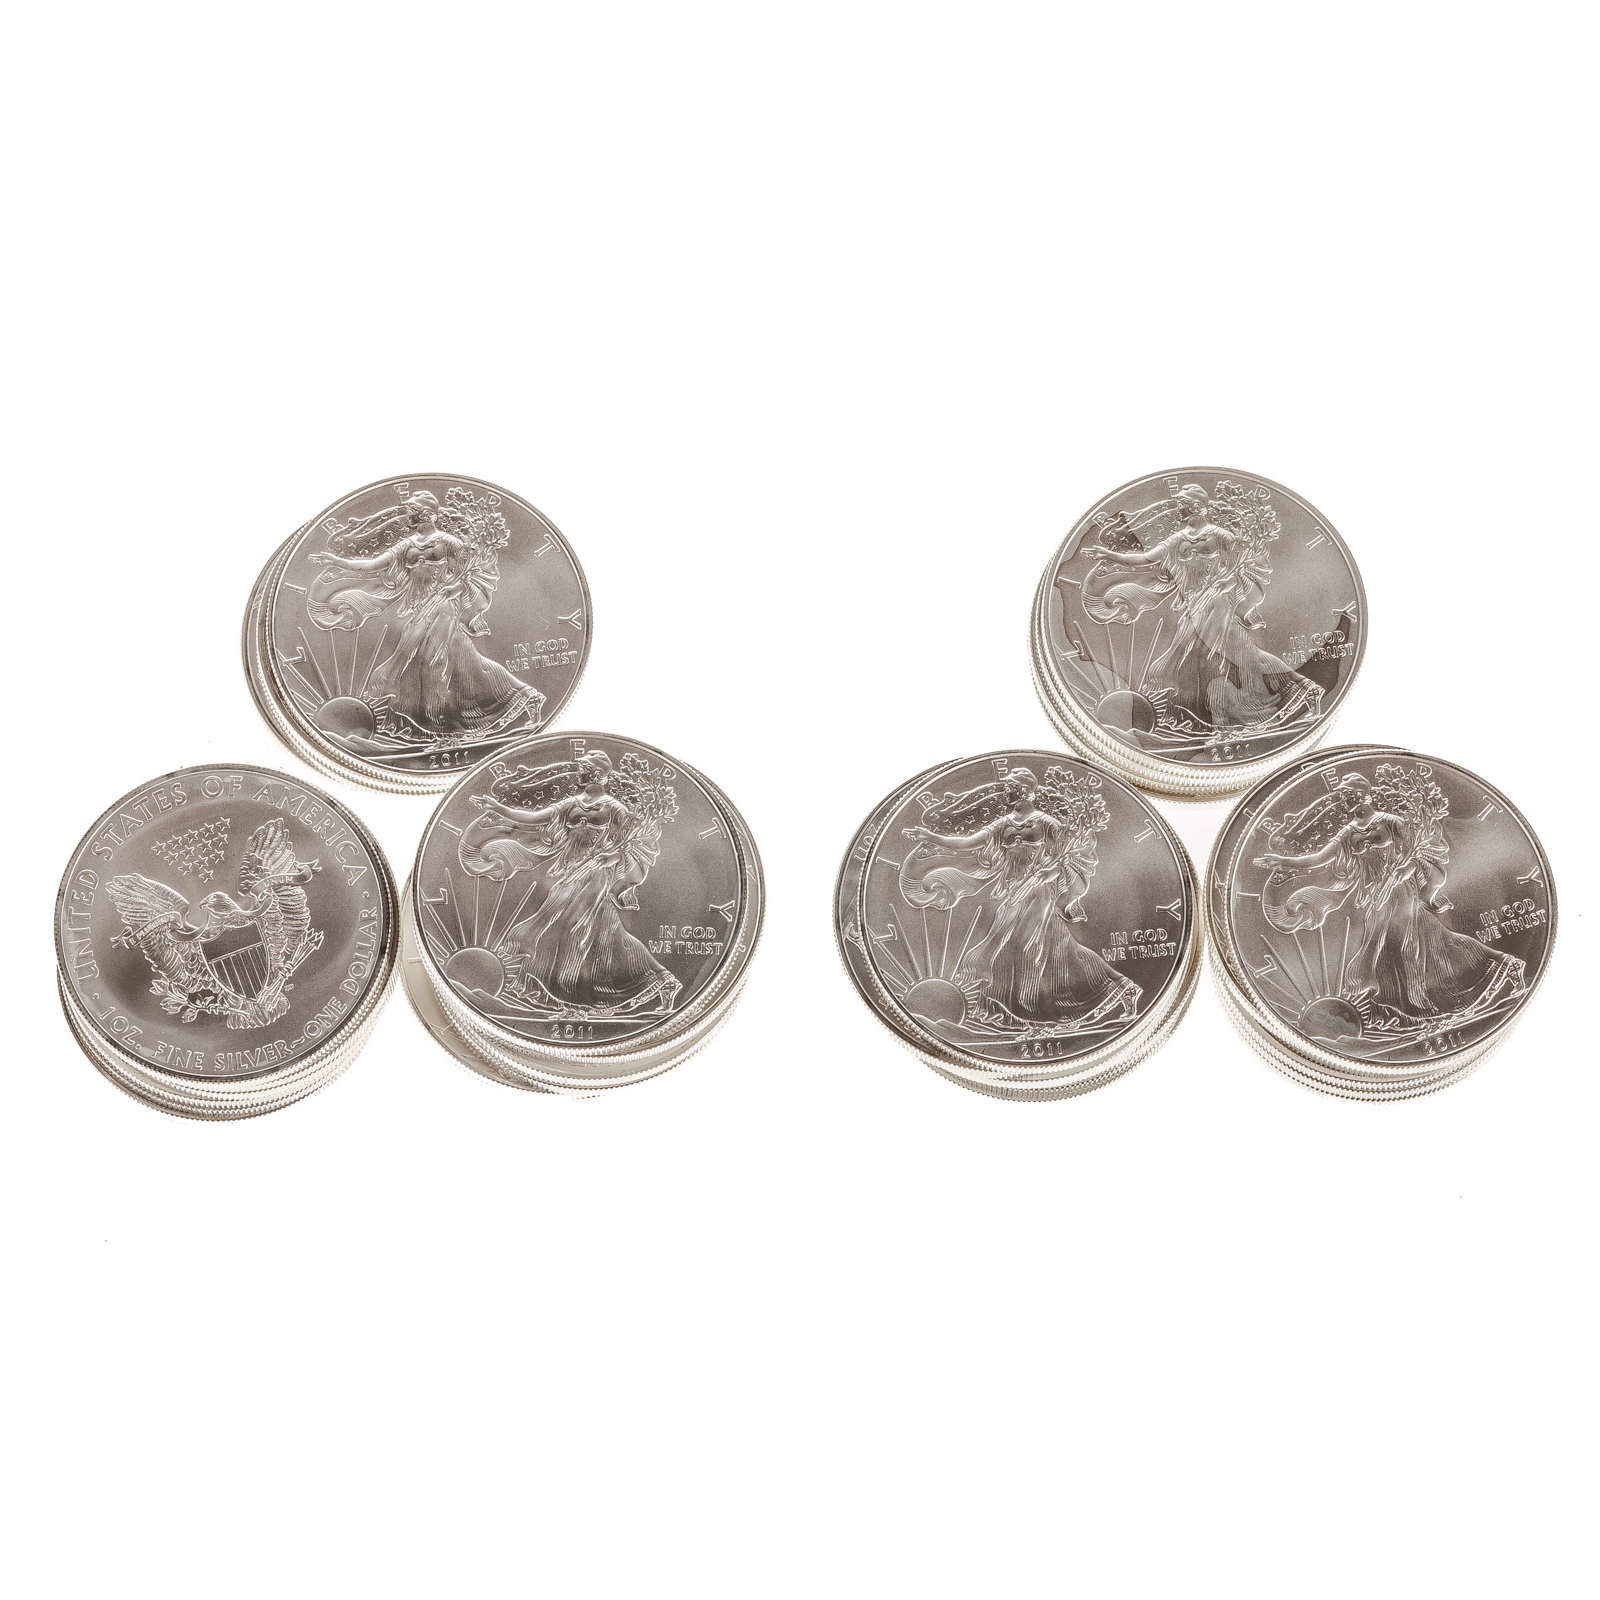 TWO ROLLS OF 2011 SILVER EAGLES  2879c5